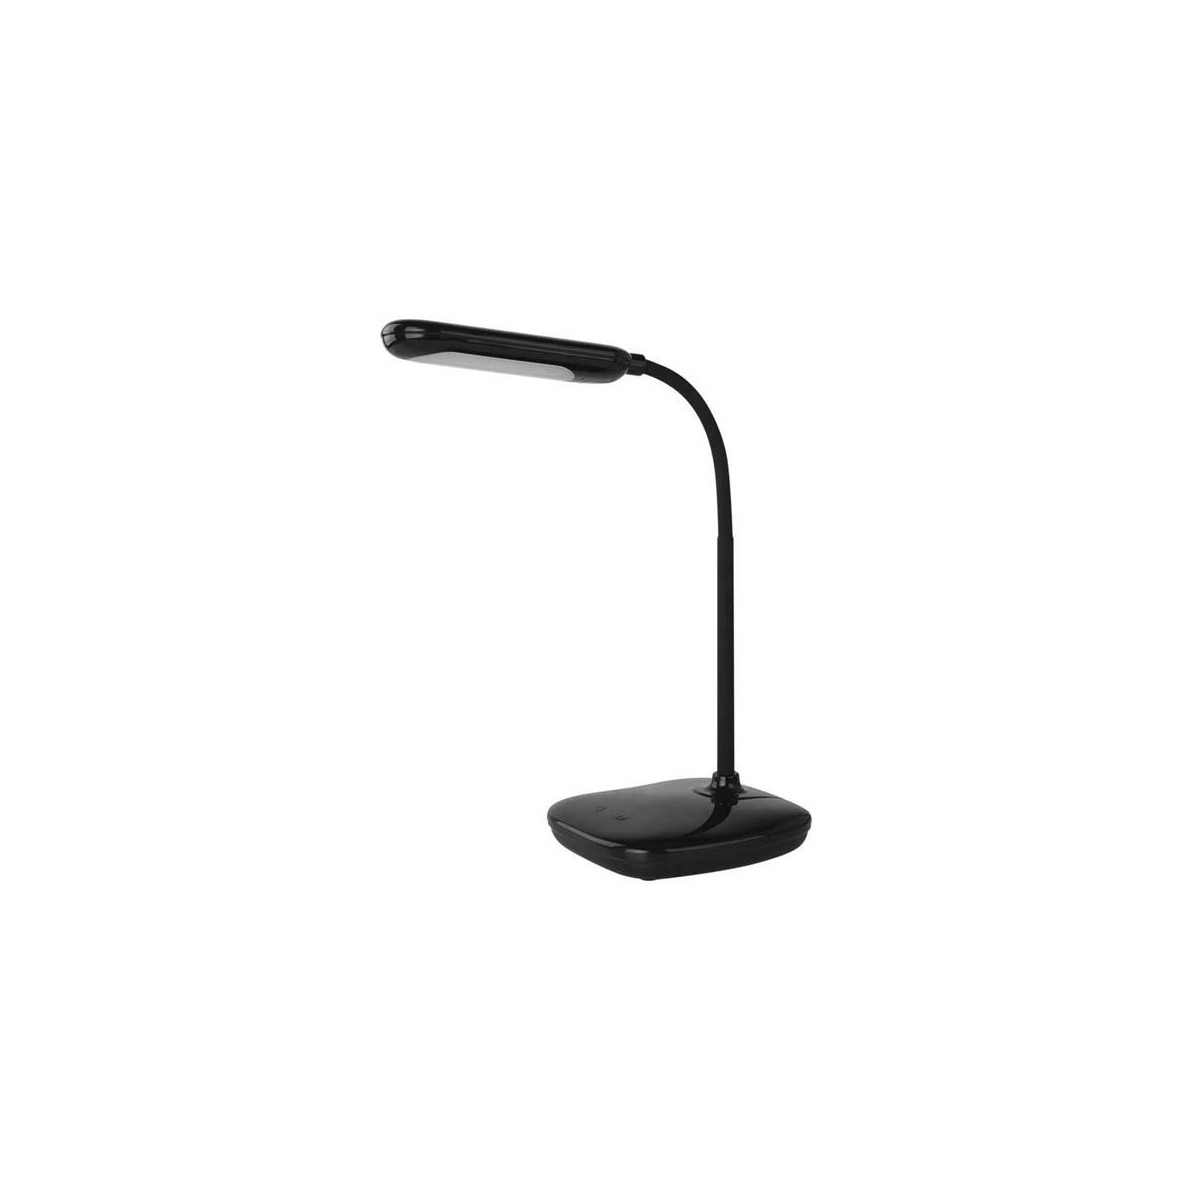 More about Lampa stolní EMOS Z7629B LILY